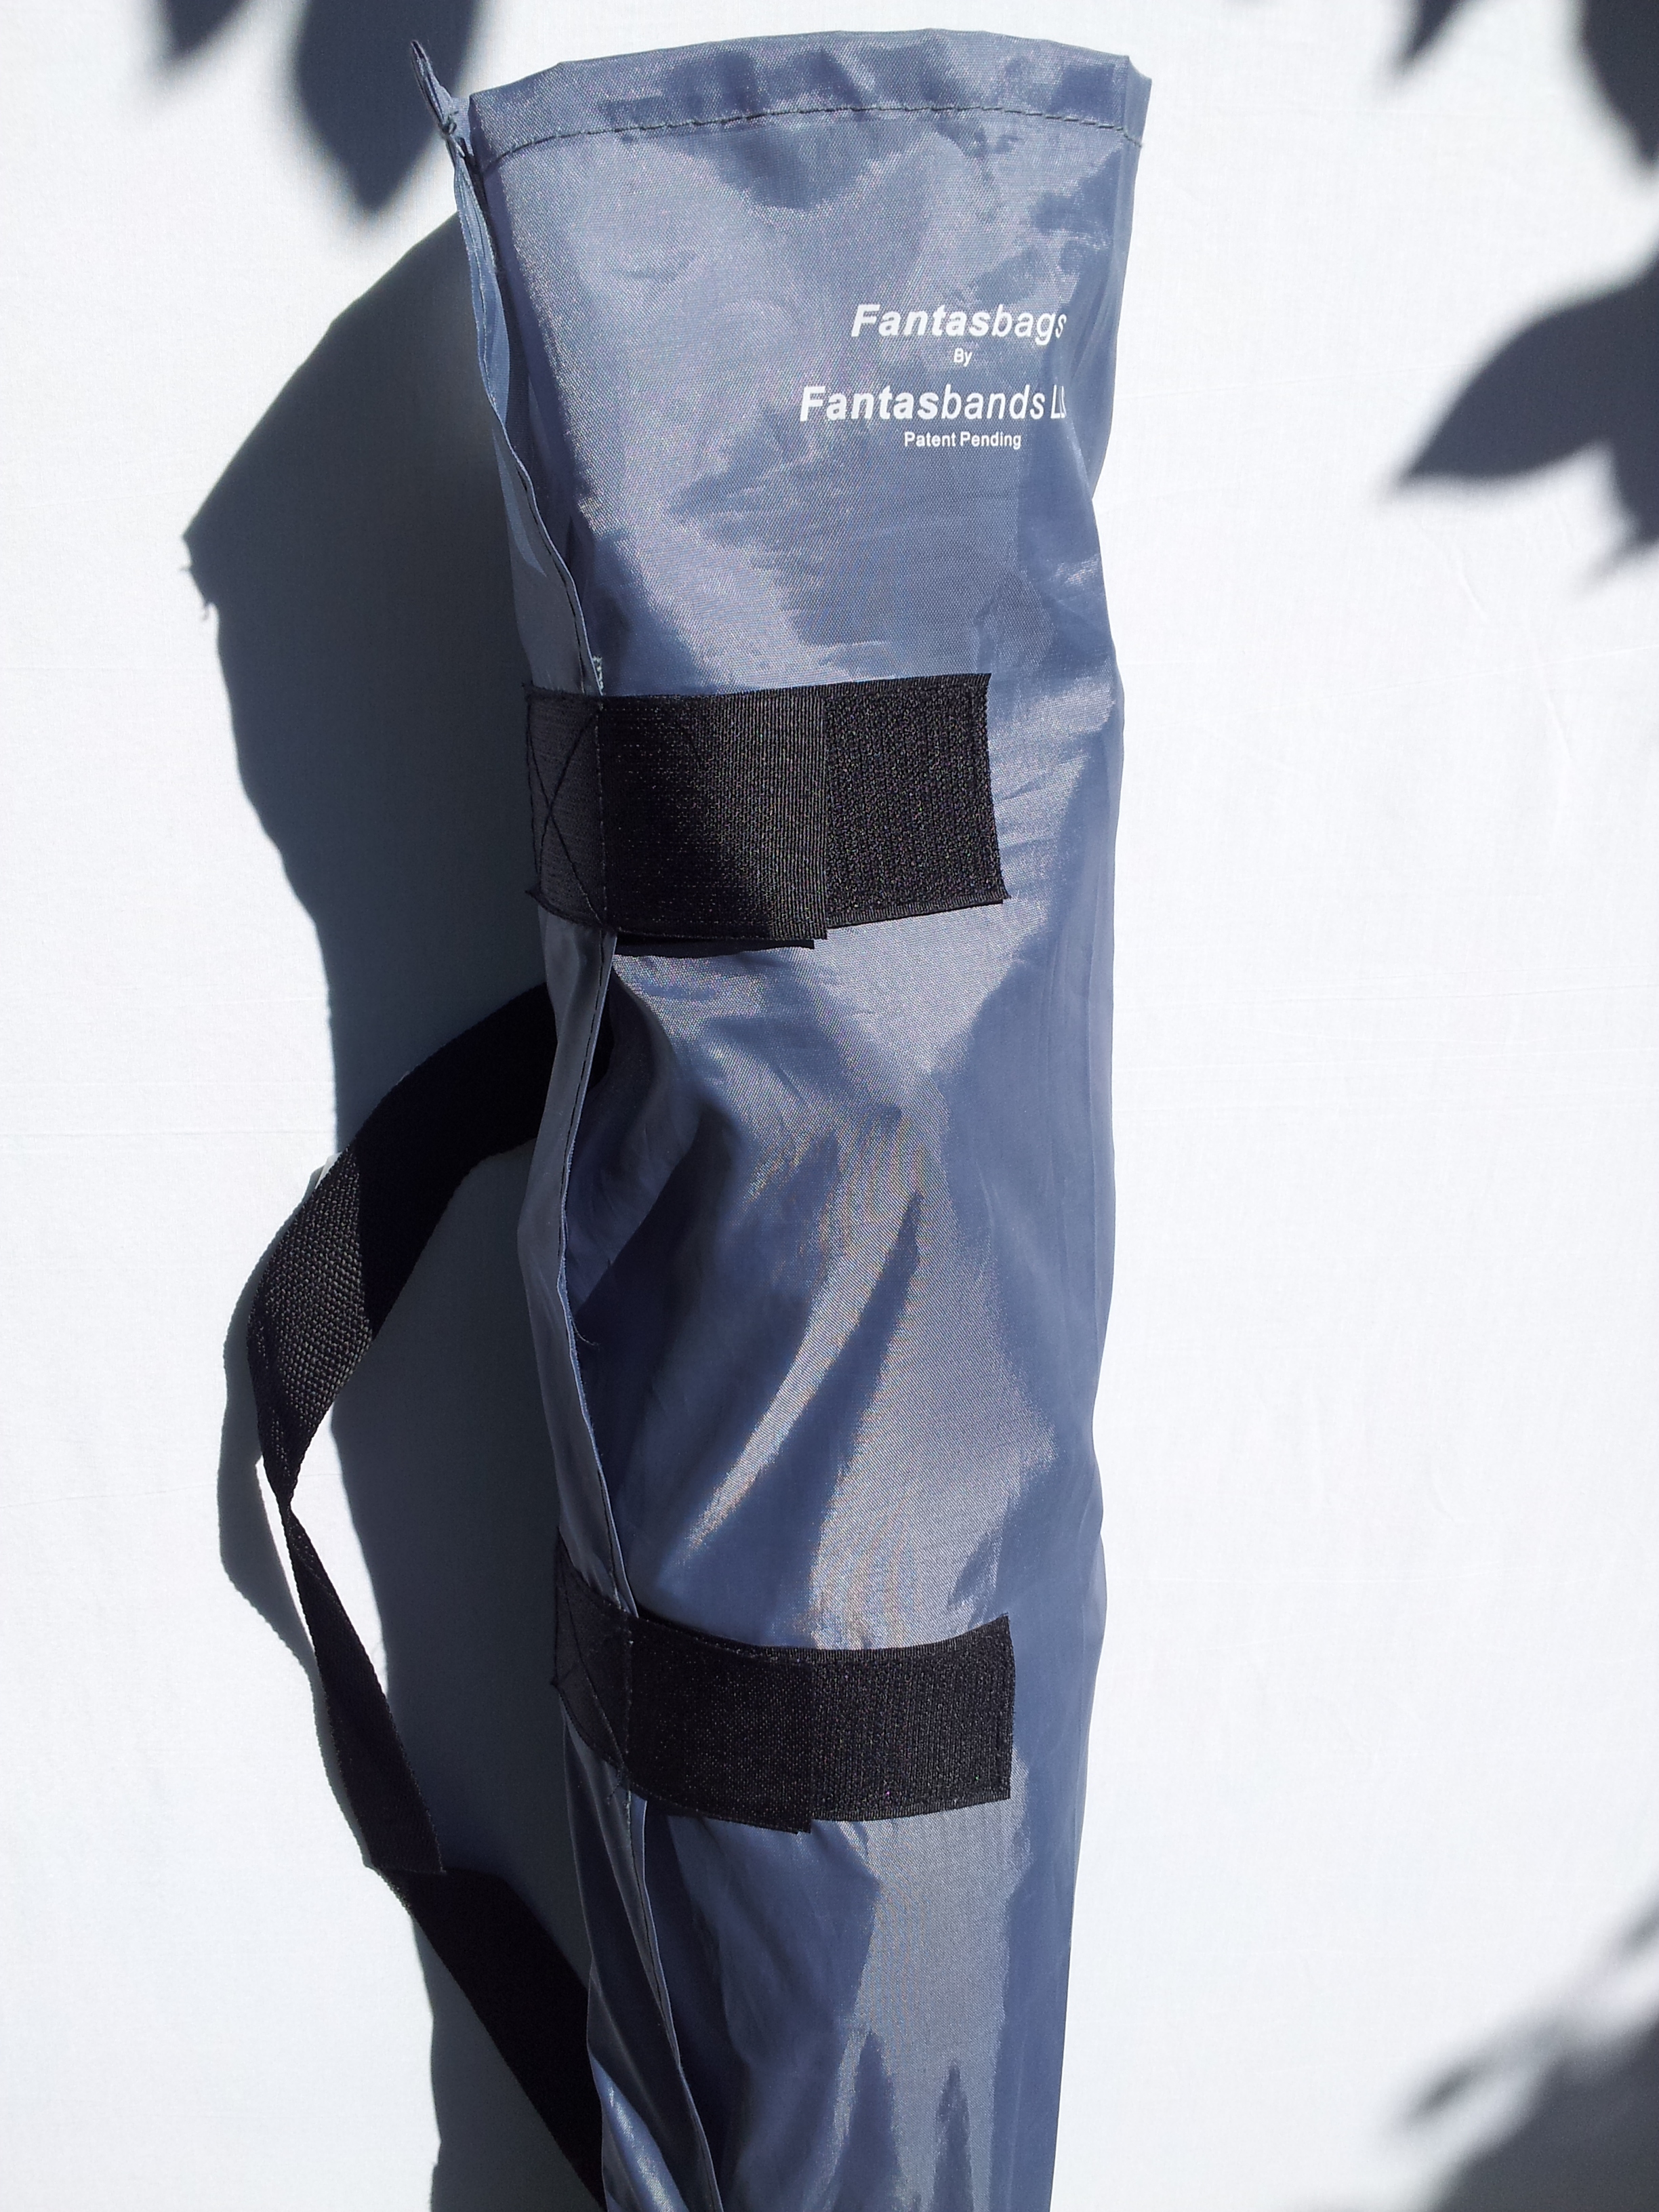 Fantasbag with chair, white background, outside.jpg